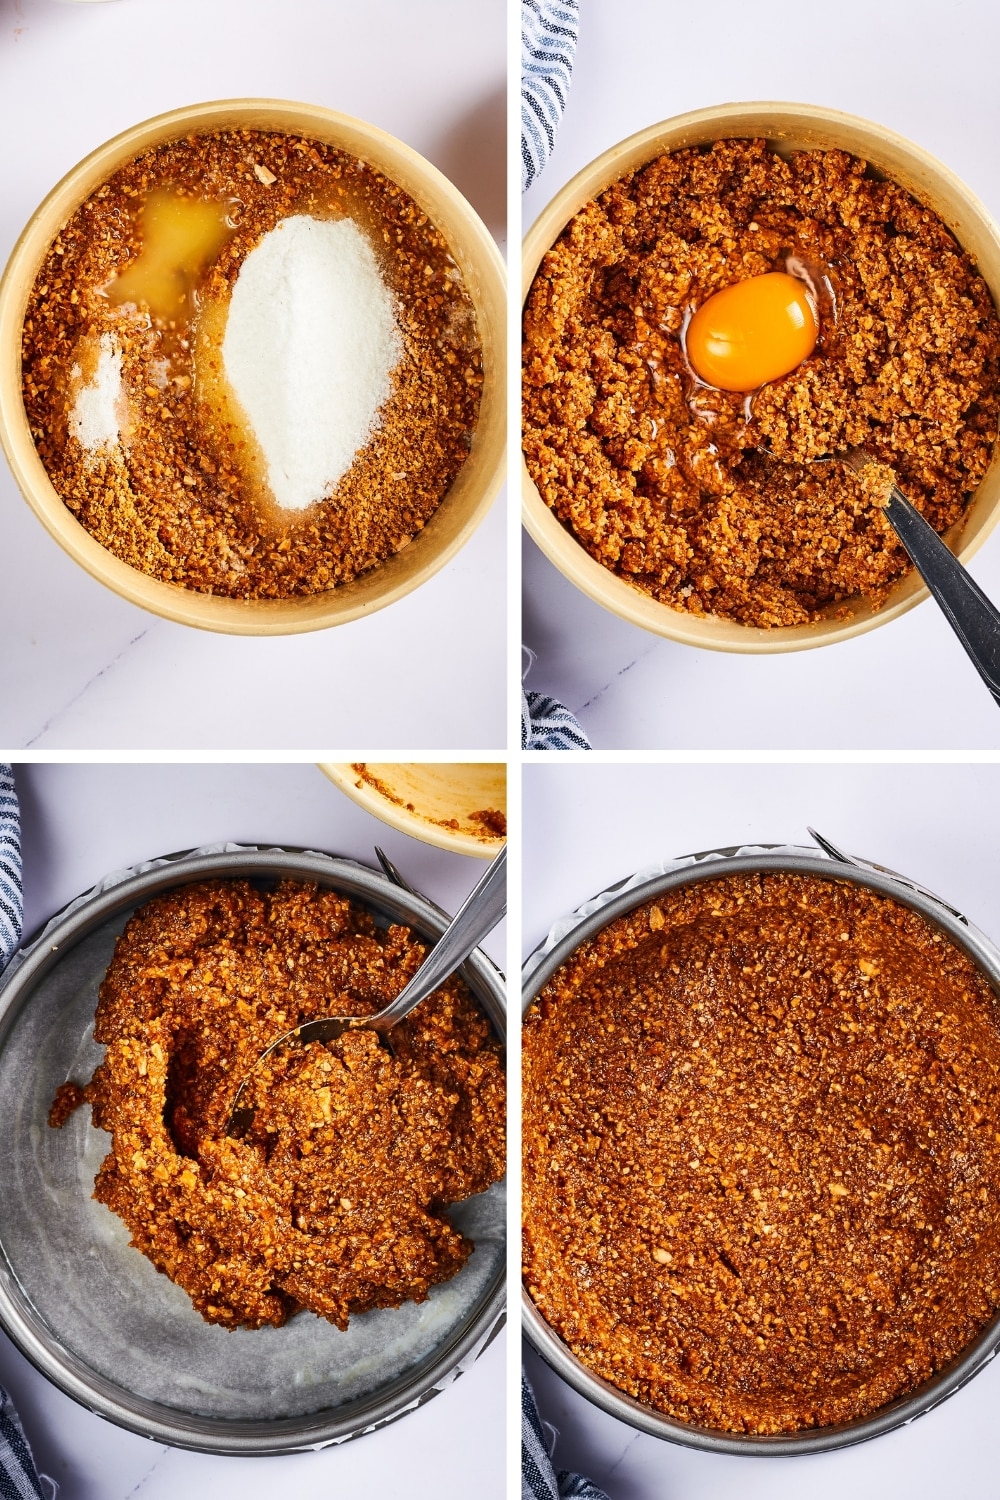 A four way split picture showing the process of making almond flour cheesecake crust.